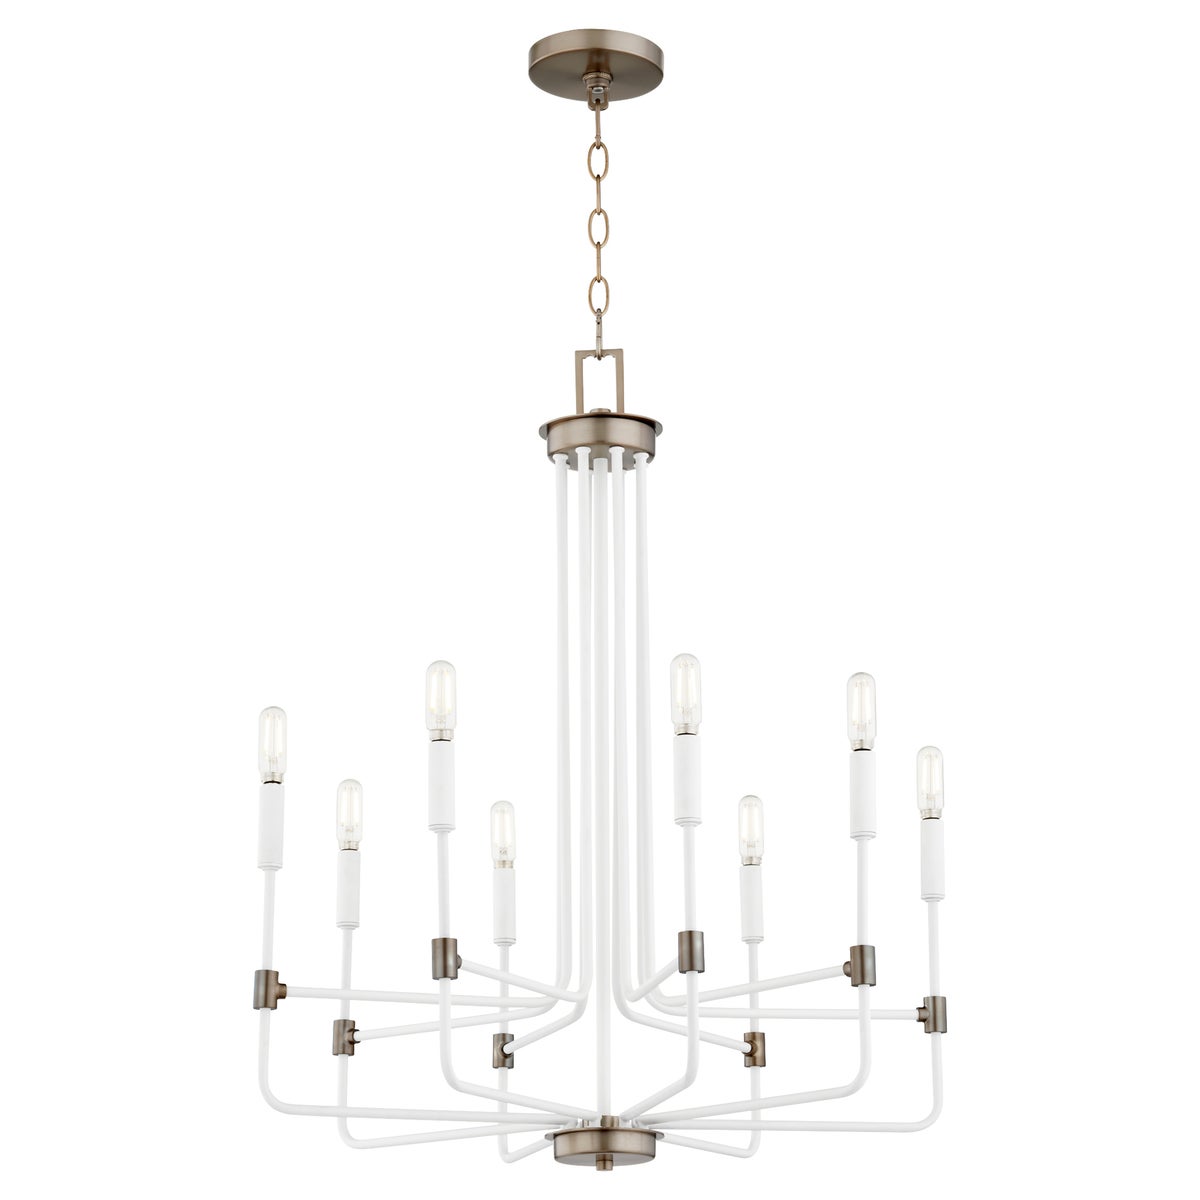 Dining Room Chandelier with white tubes and multiple light bulbs, adding a touch of balance to any environment.